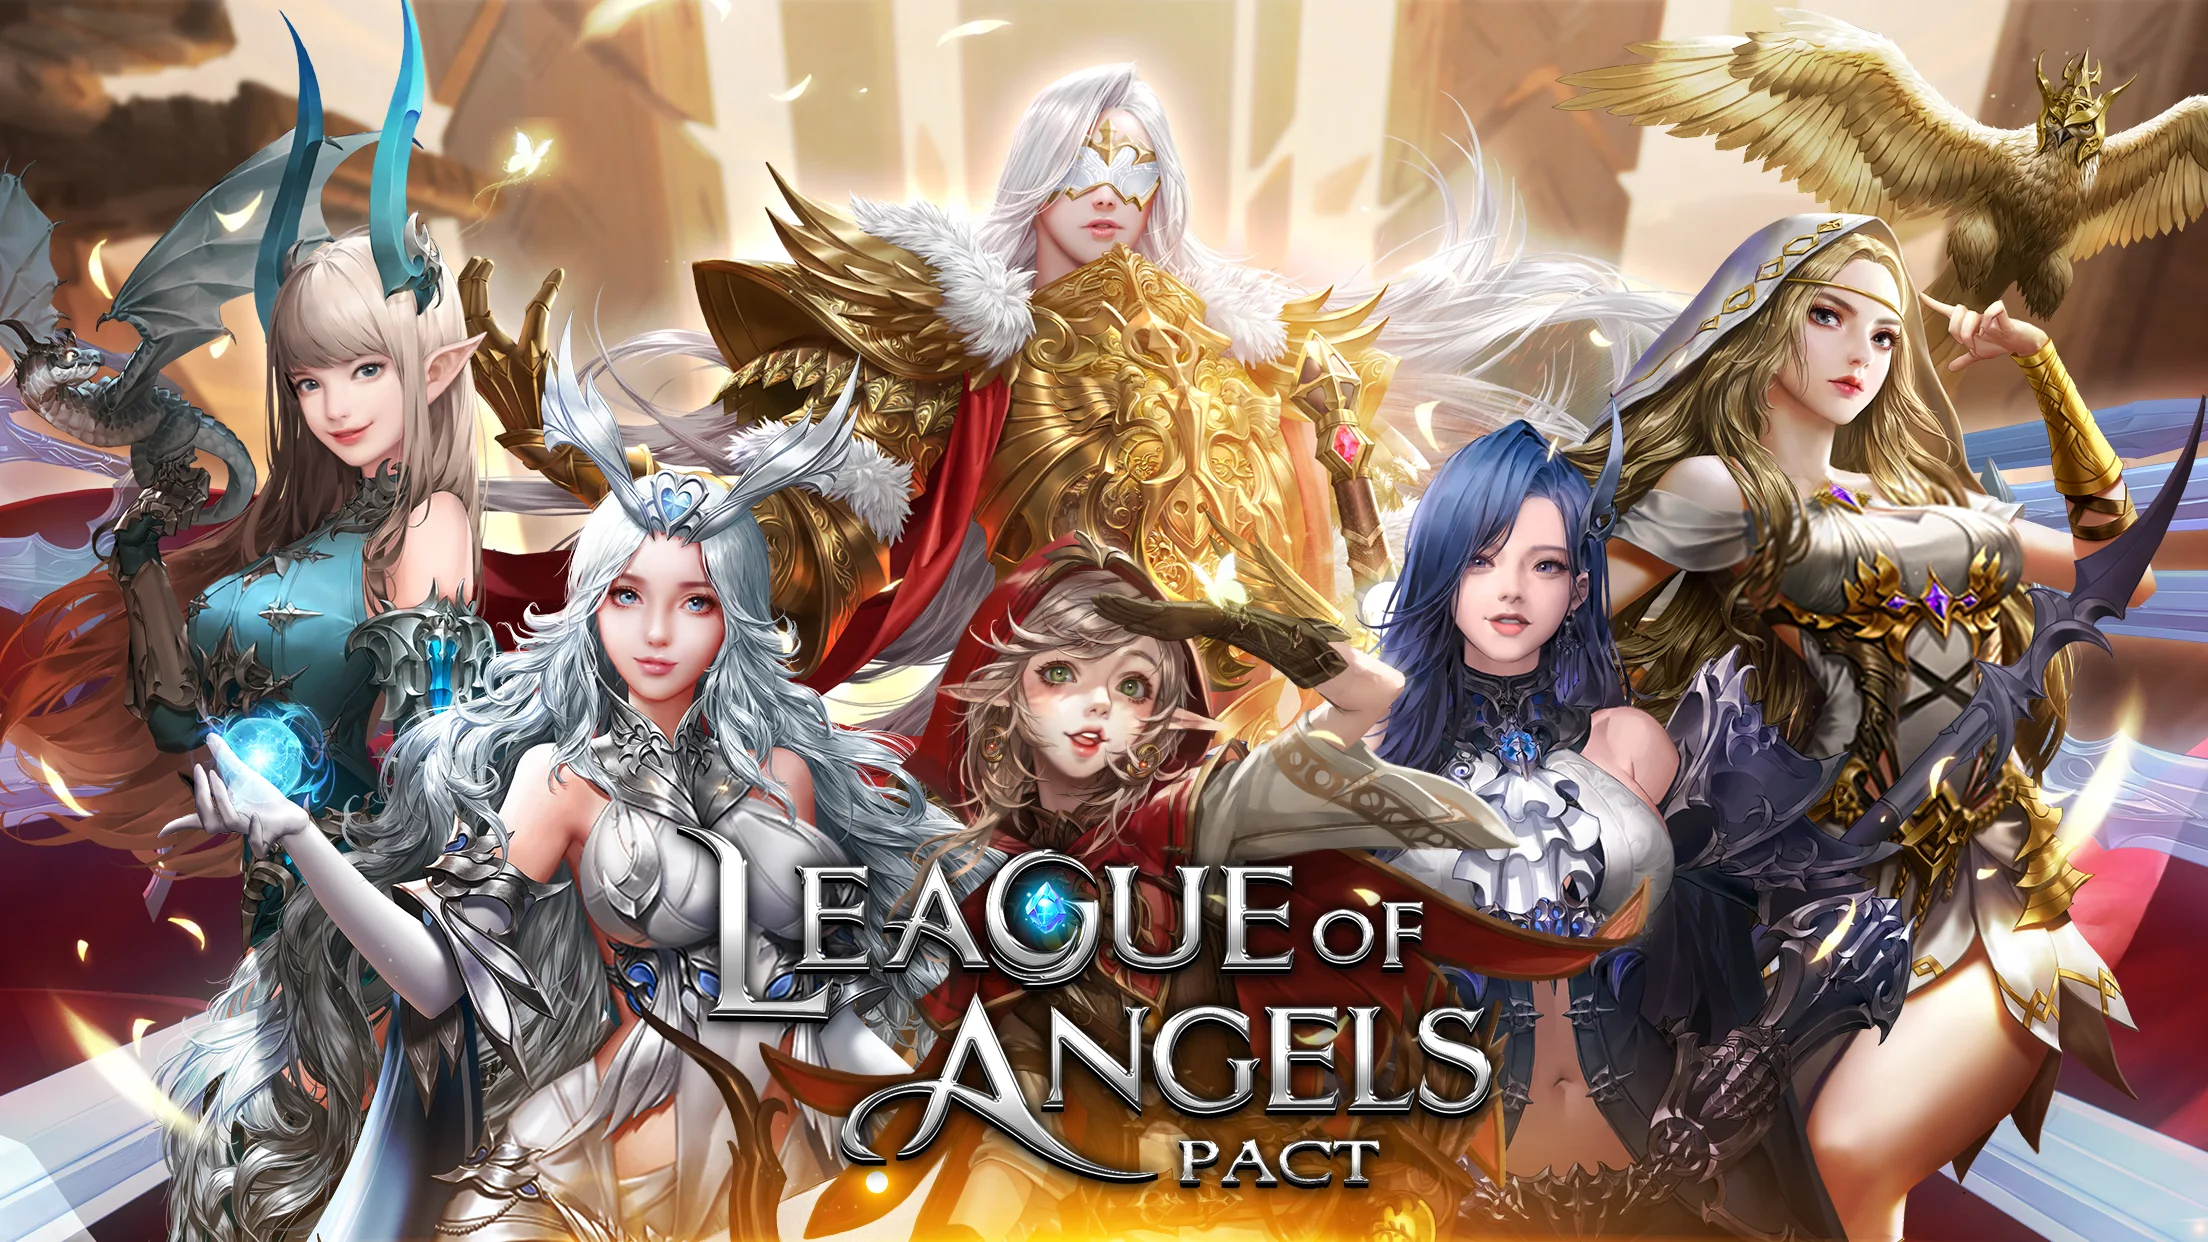 League of Angels: Pact on PC